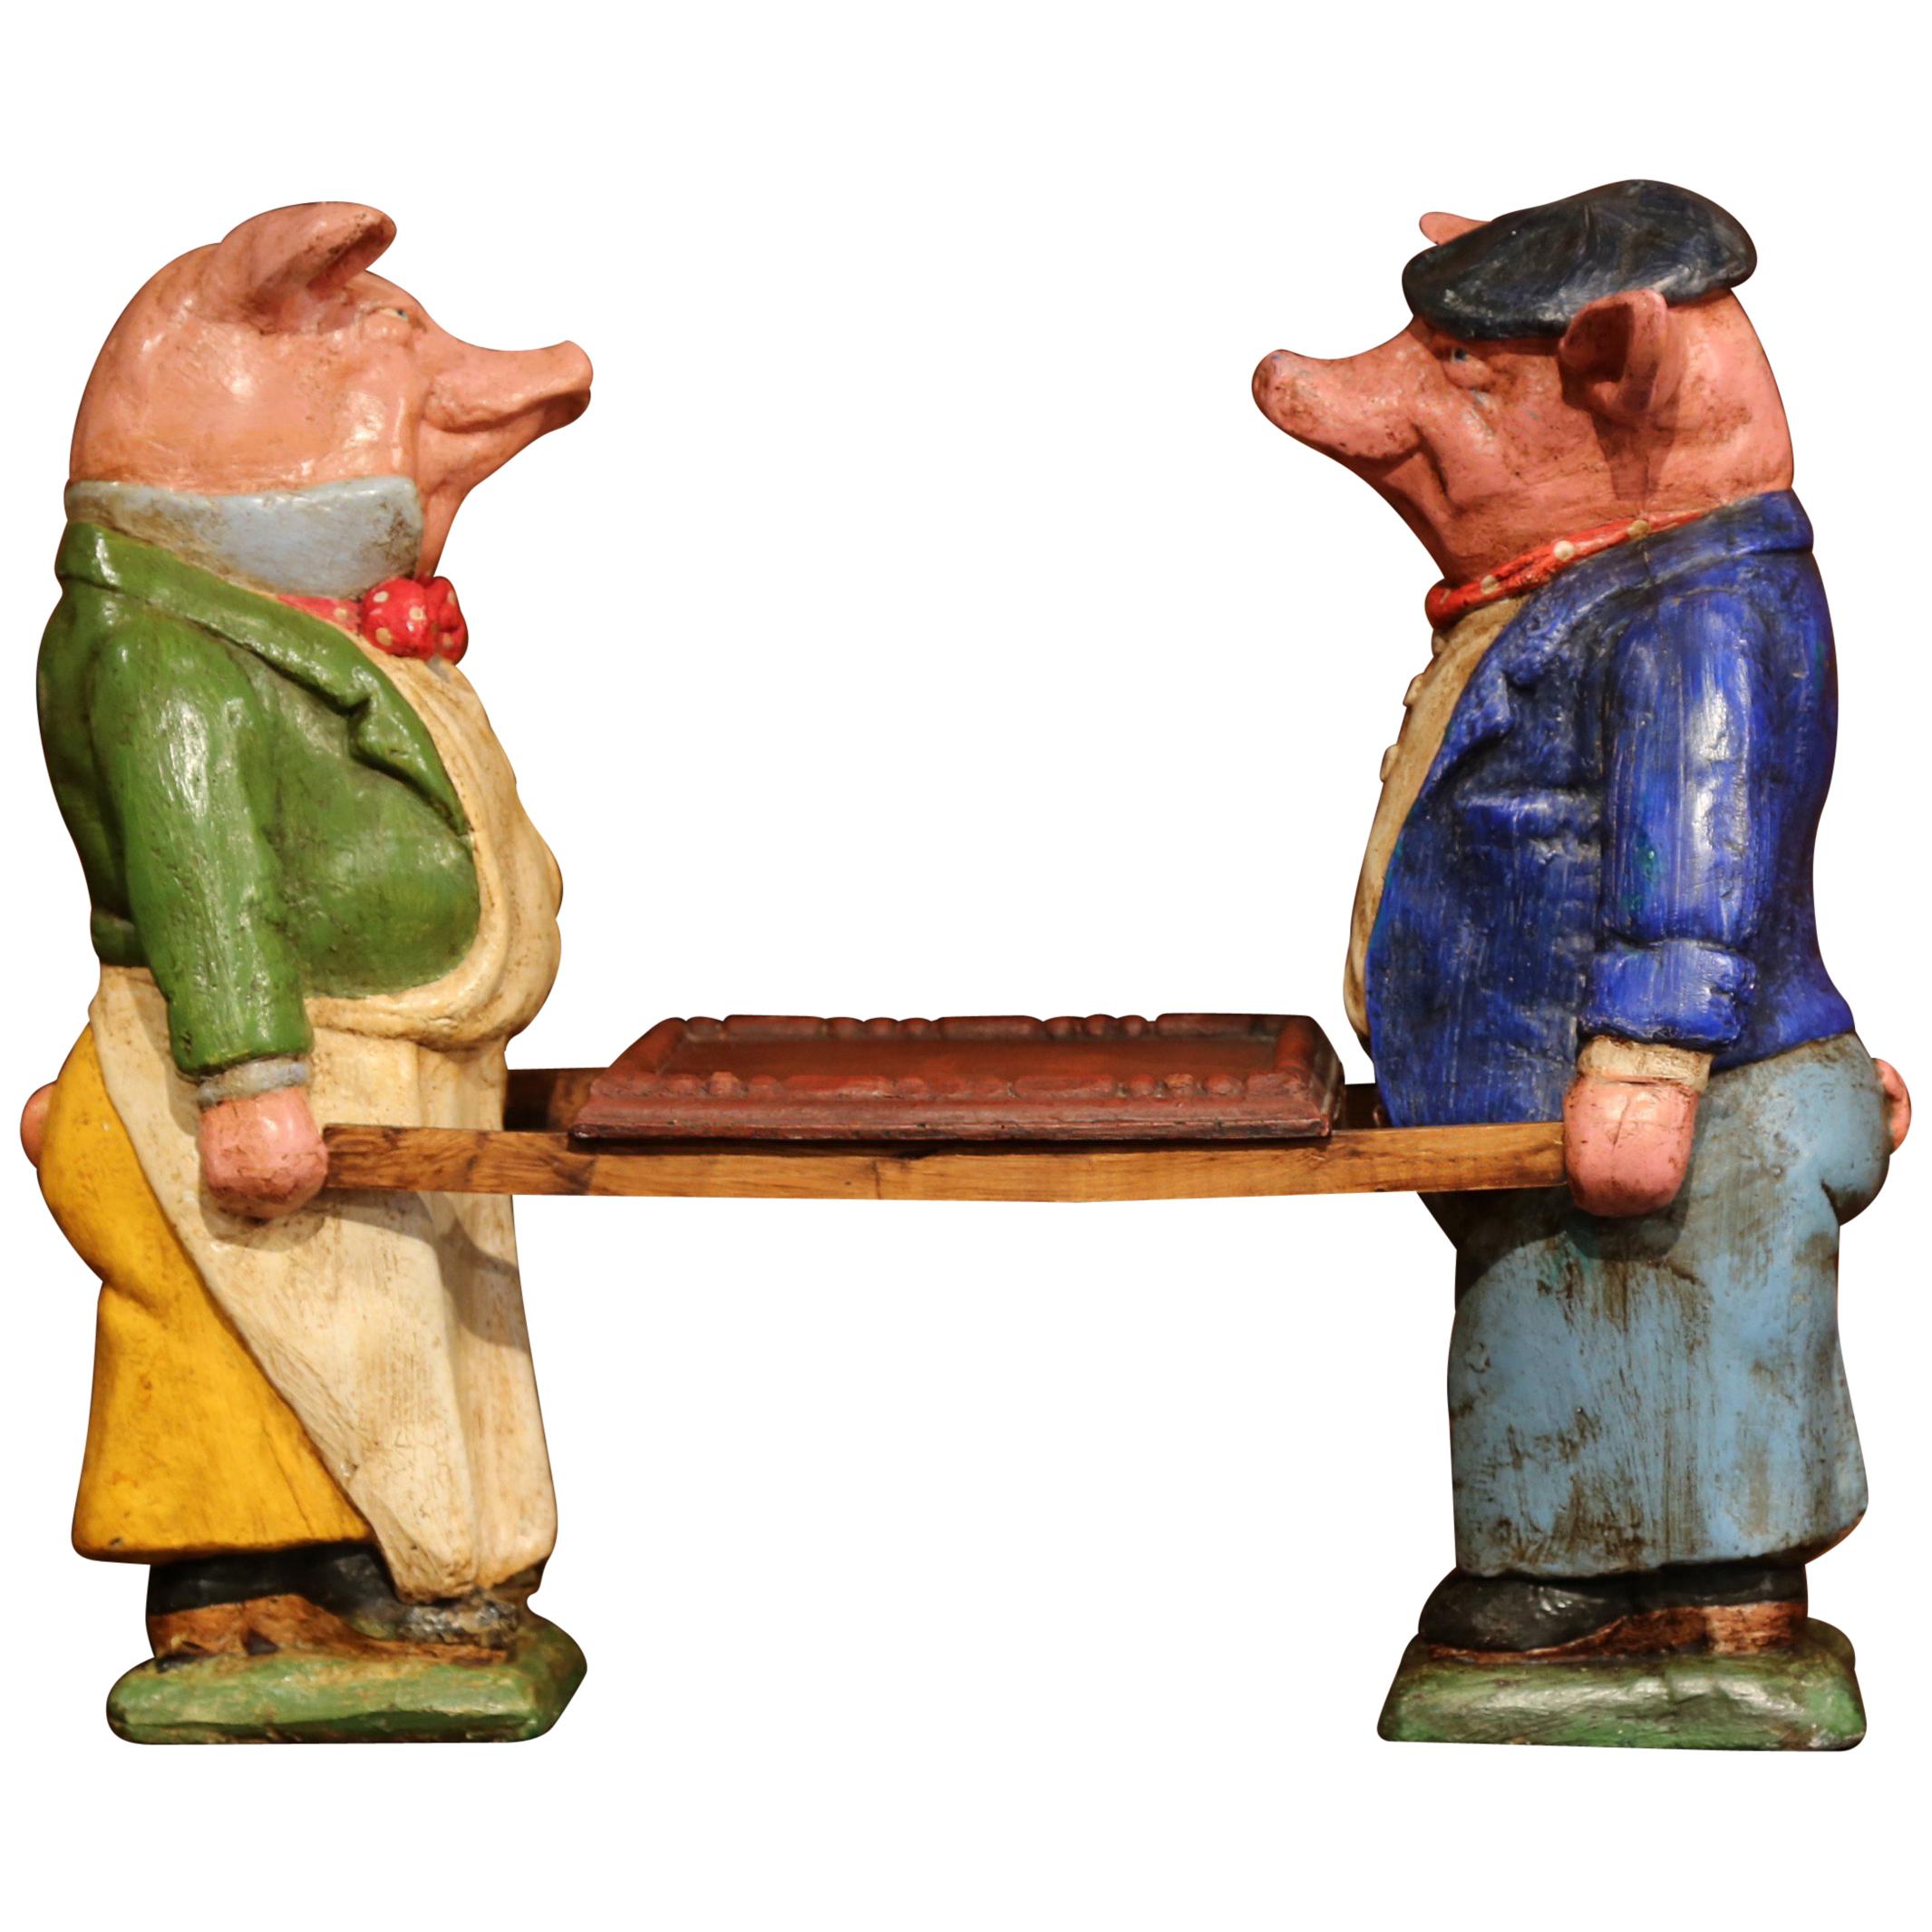 Pair of Early 20th Century French Hand Painted Ceramic Pig Sculptures with Tray